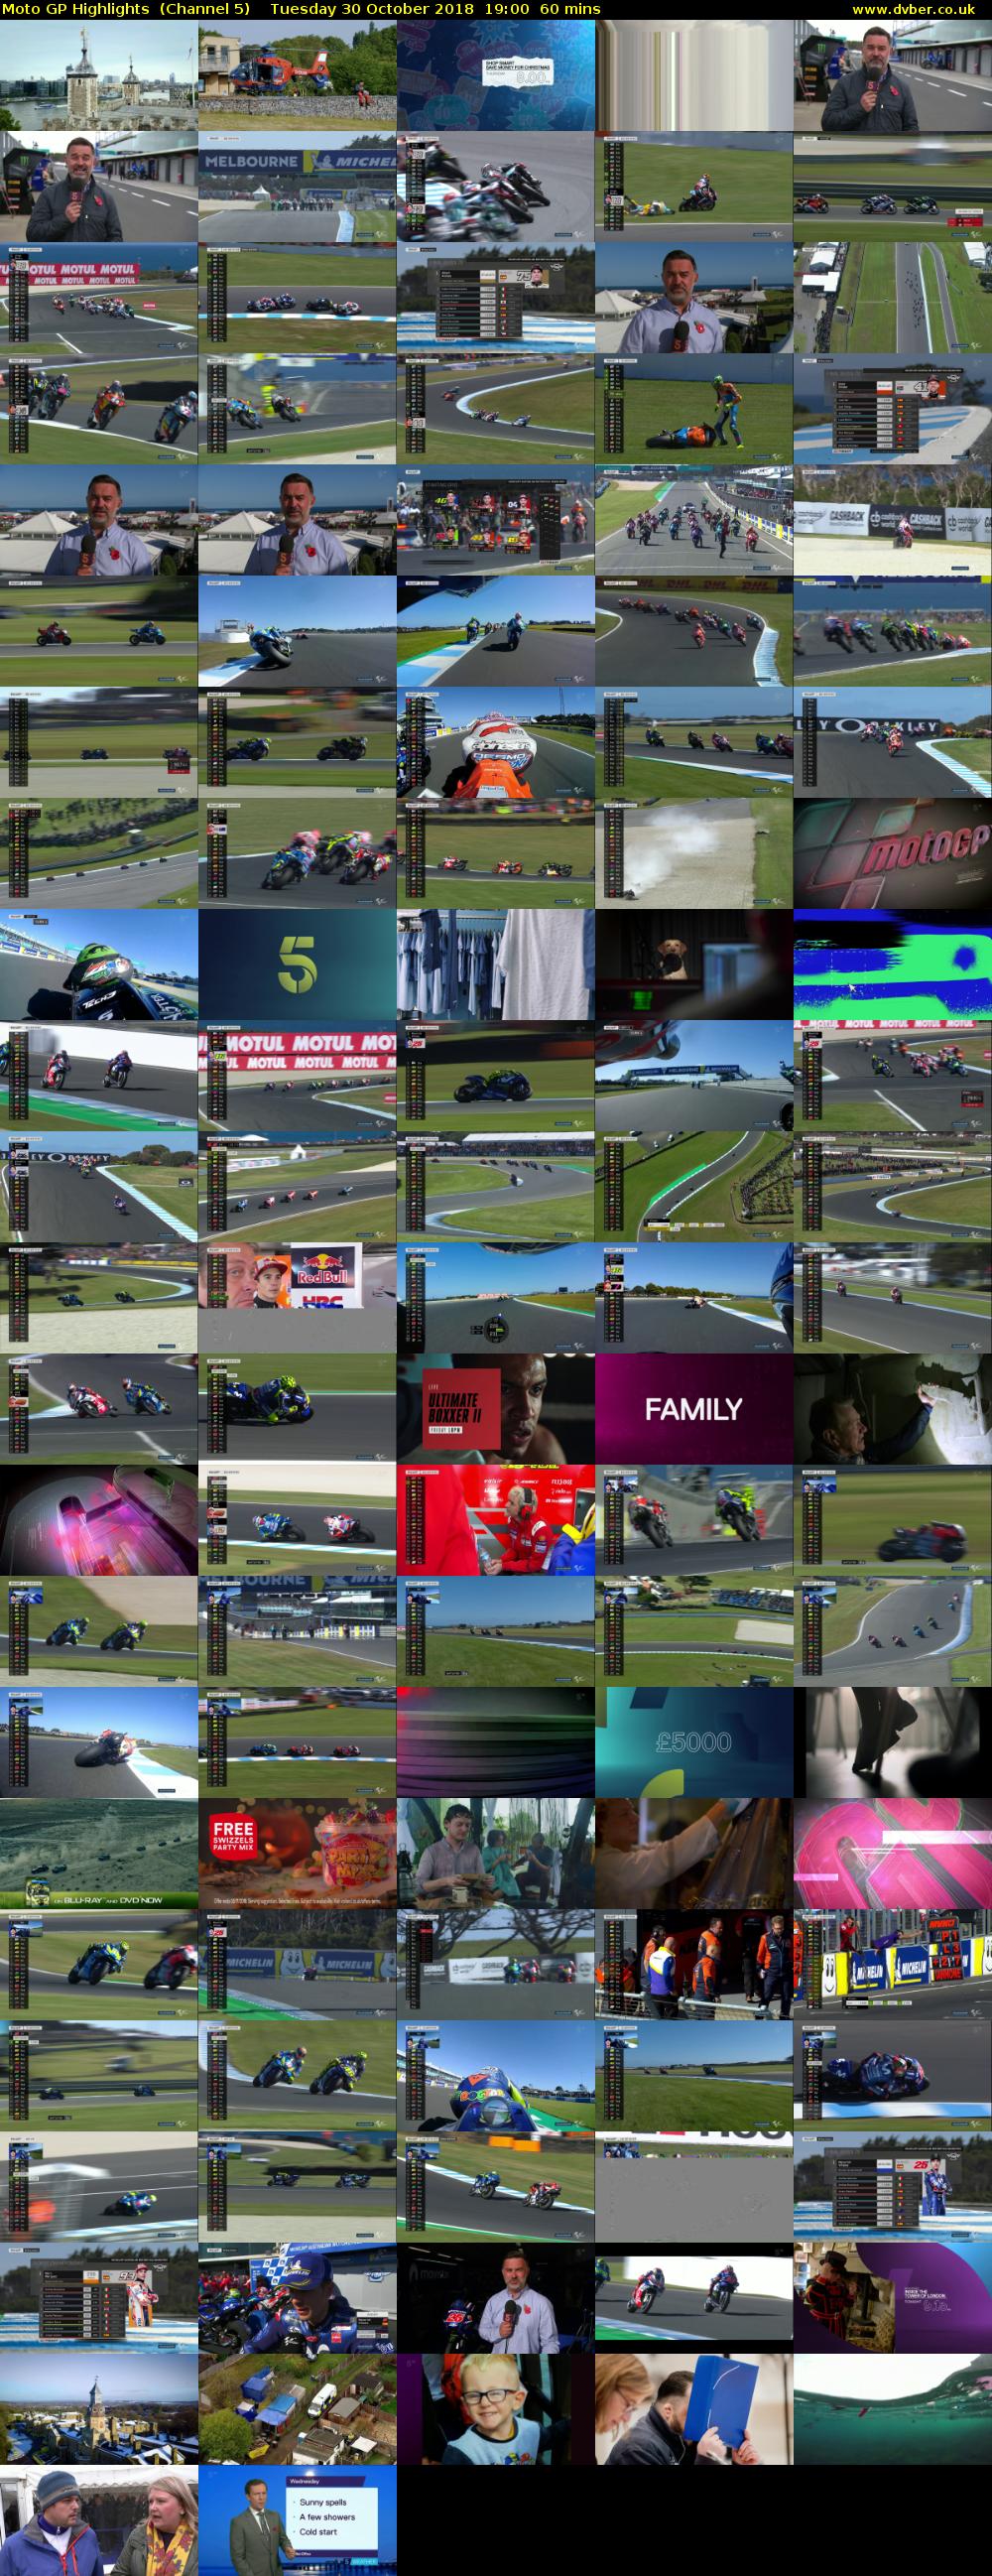 Moto GP Highlights  (Channel 5) Tuesday 30 October 2018 19:00 - 20:00